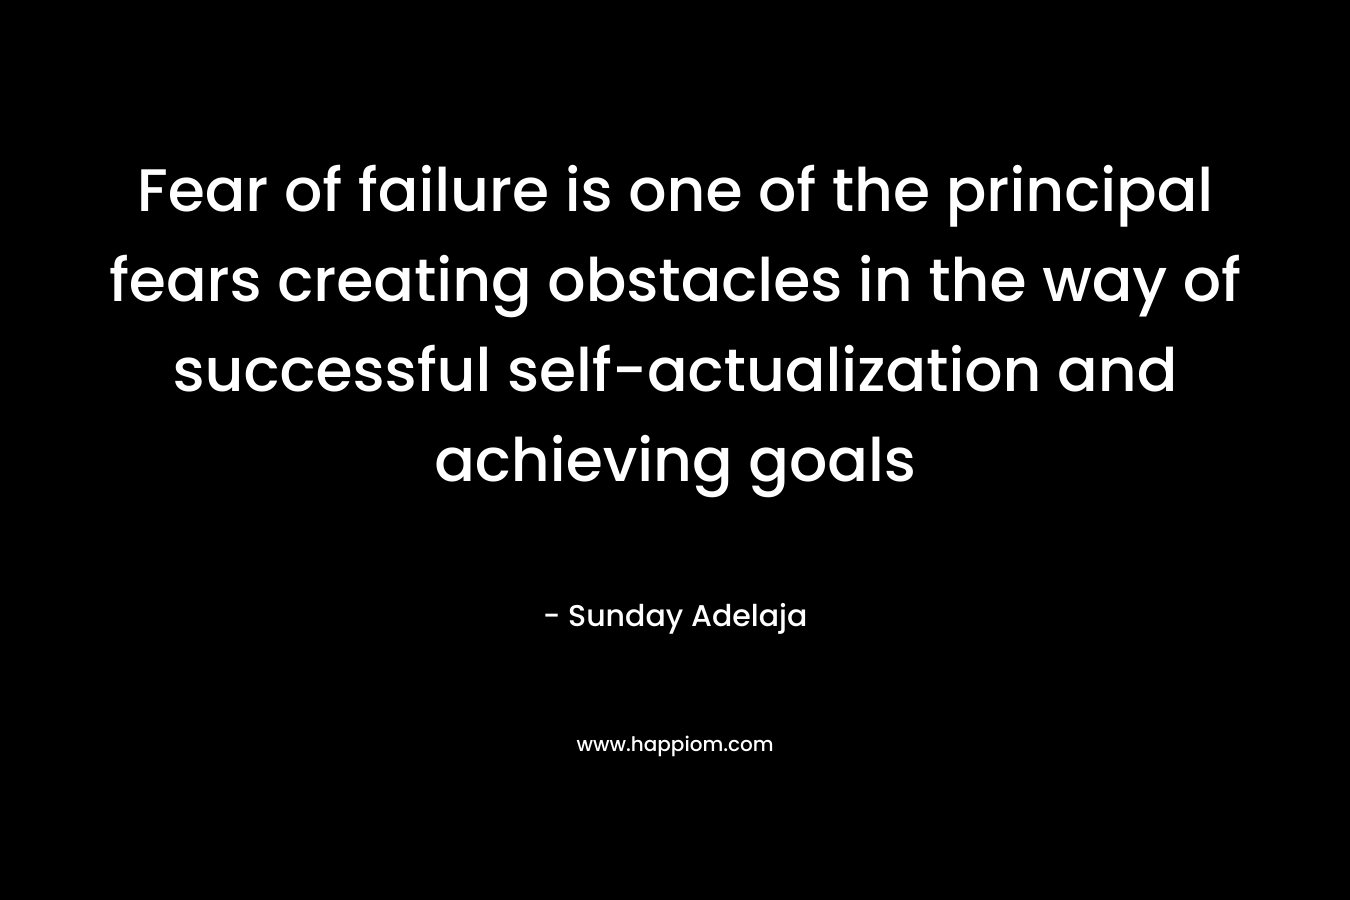 Fear of failure is one of the principal fears creating obstacles in the way of successful self-actualization and achieving goals